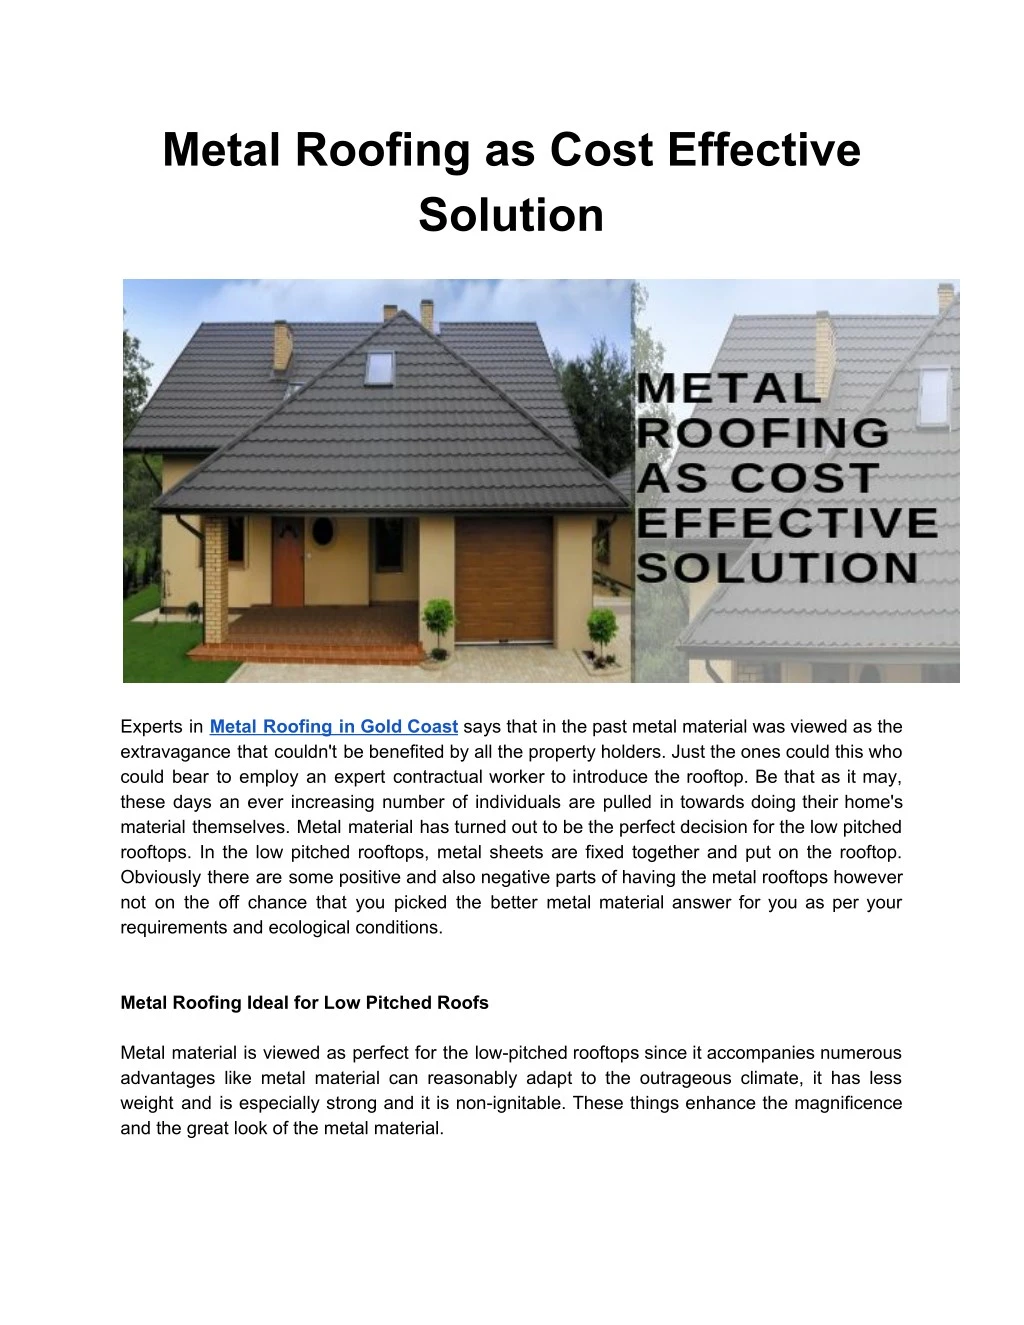 metal roofing as cost effective solution